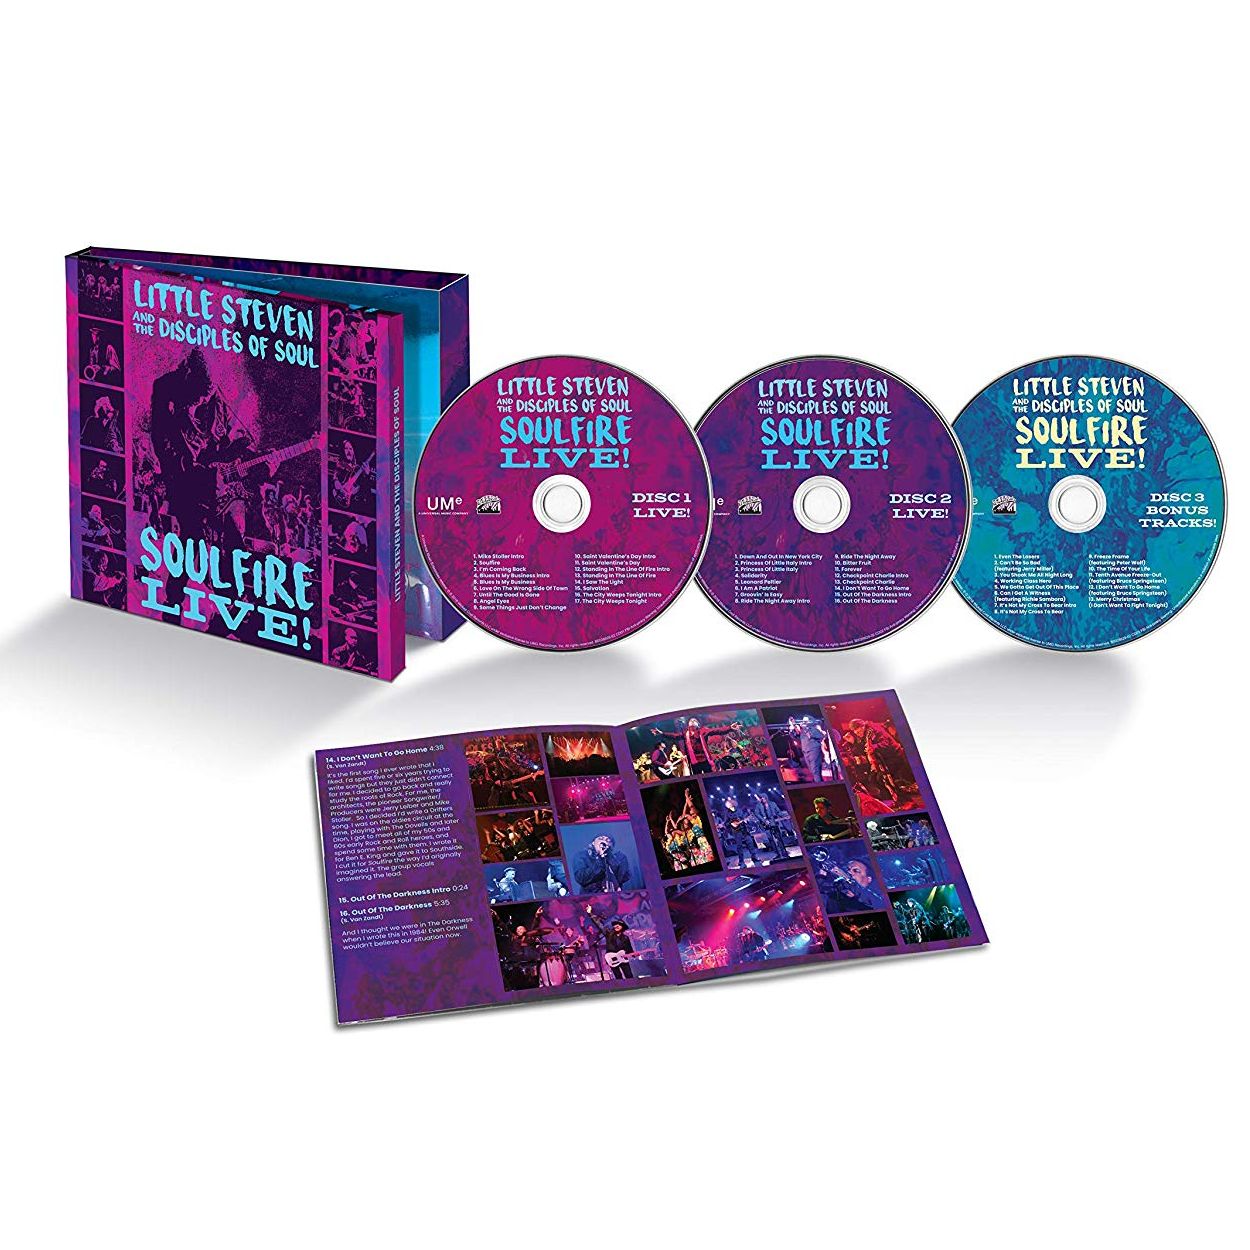 LITTLE STEVEN AND THE DISCIPLES OF SOUL / SOULFIRE LIVE! (3CD)